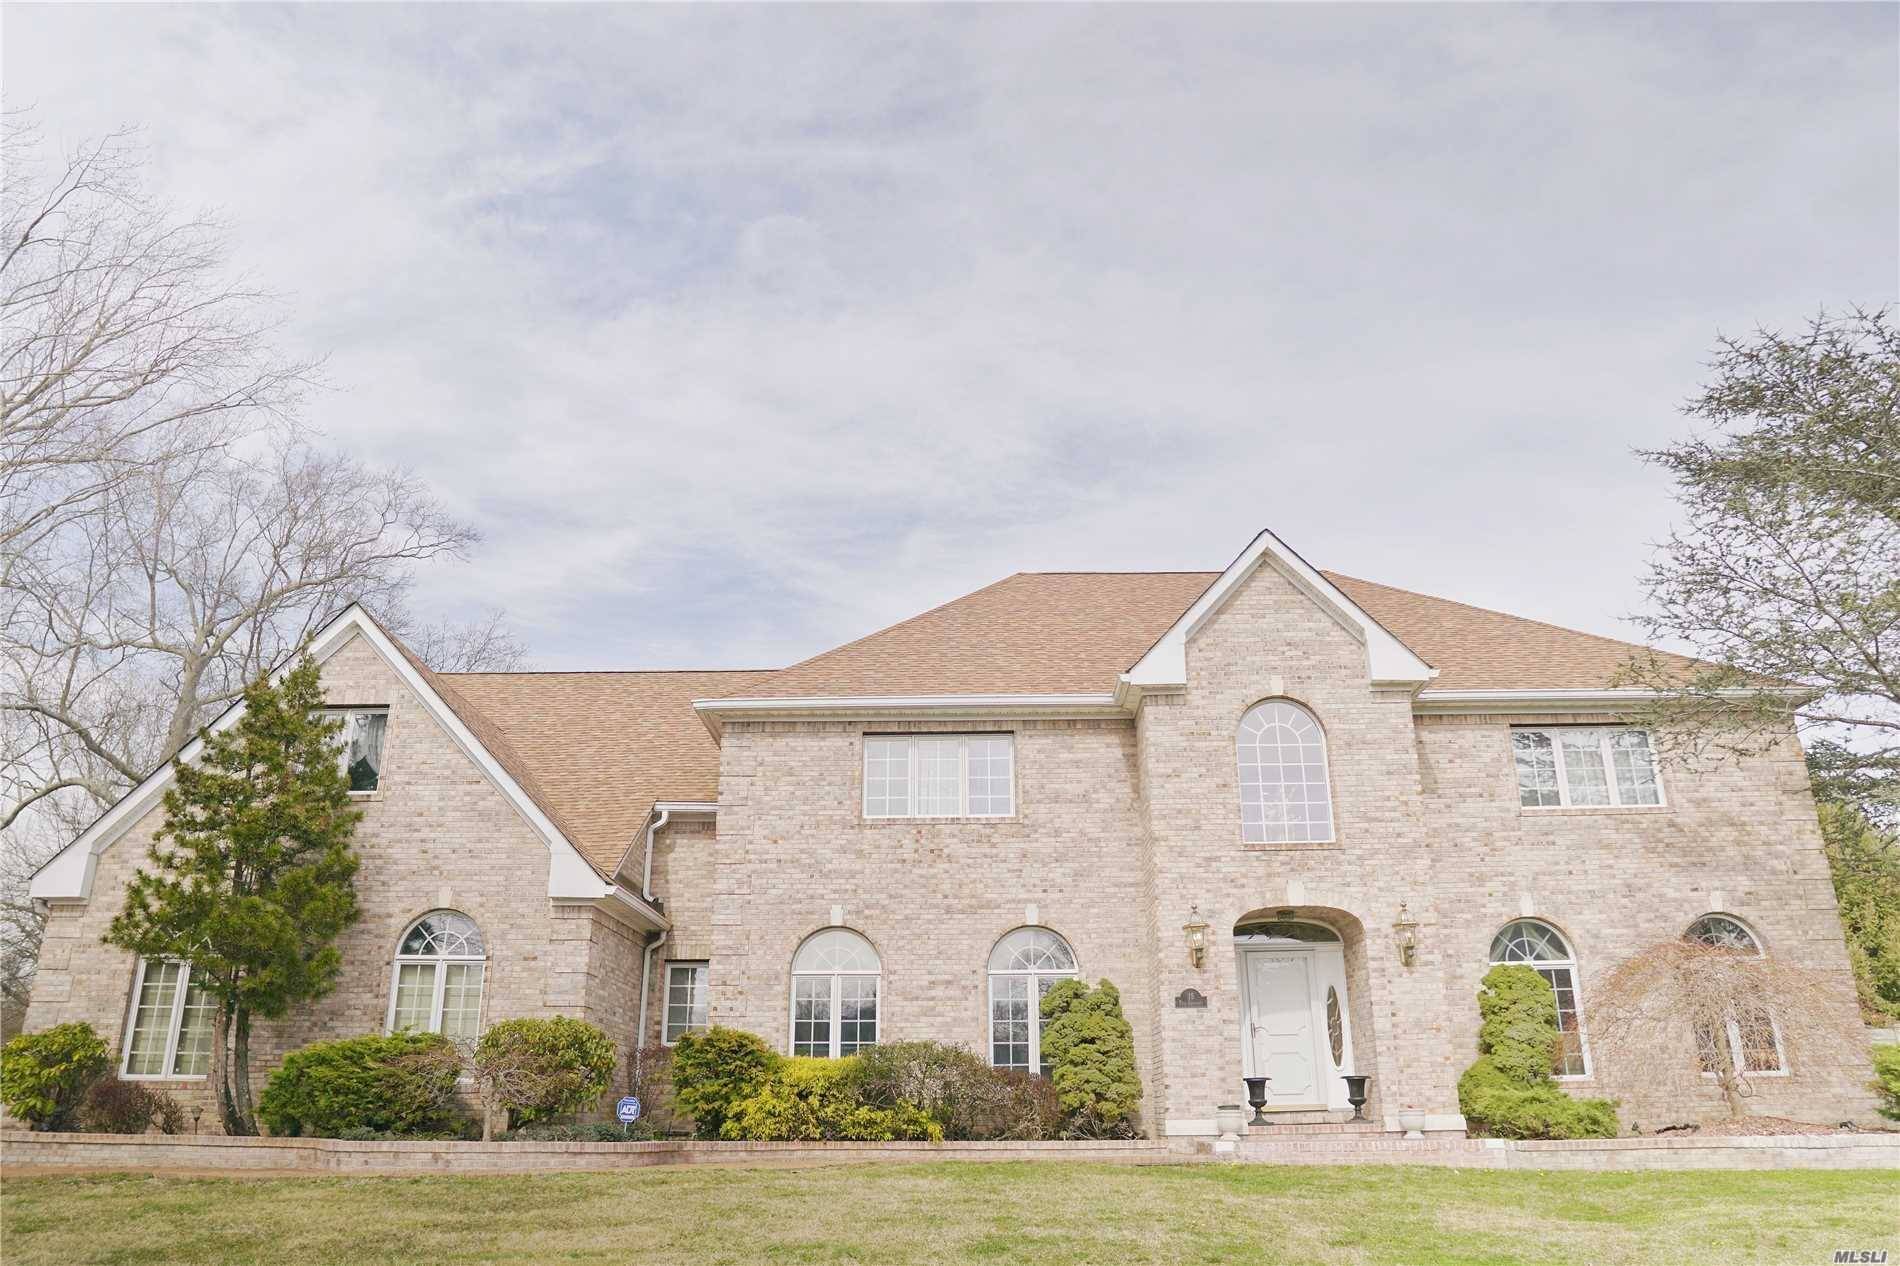 Beautiful Large Center Hall Colonial Mansion On End Of Cul De Sac 5100 Sq Ft On 1 2 Acre Plus !